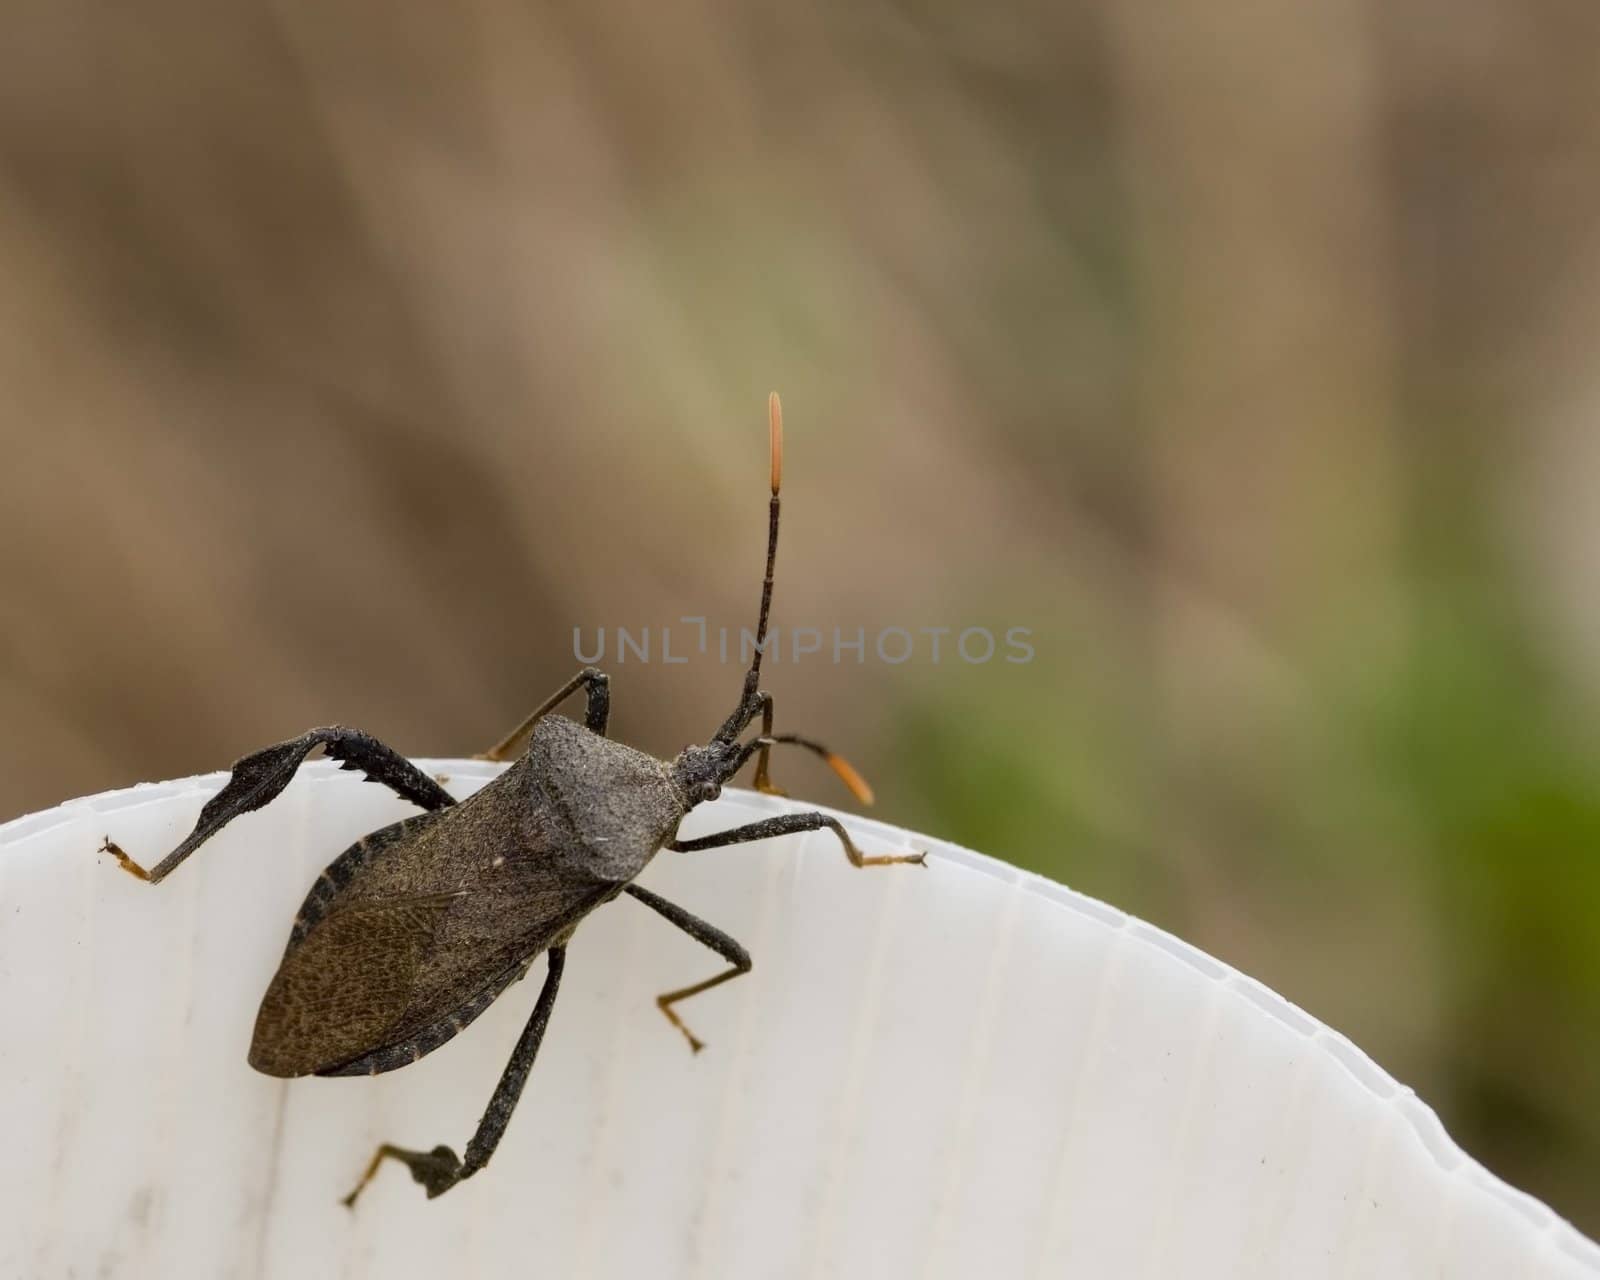 Leaf-footed bug perched on a white pipe outdoors.